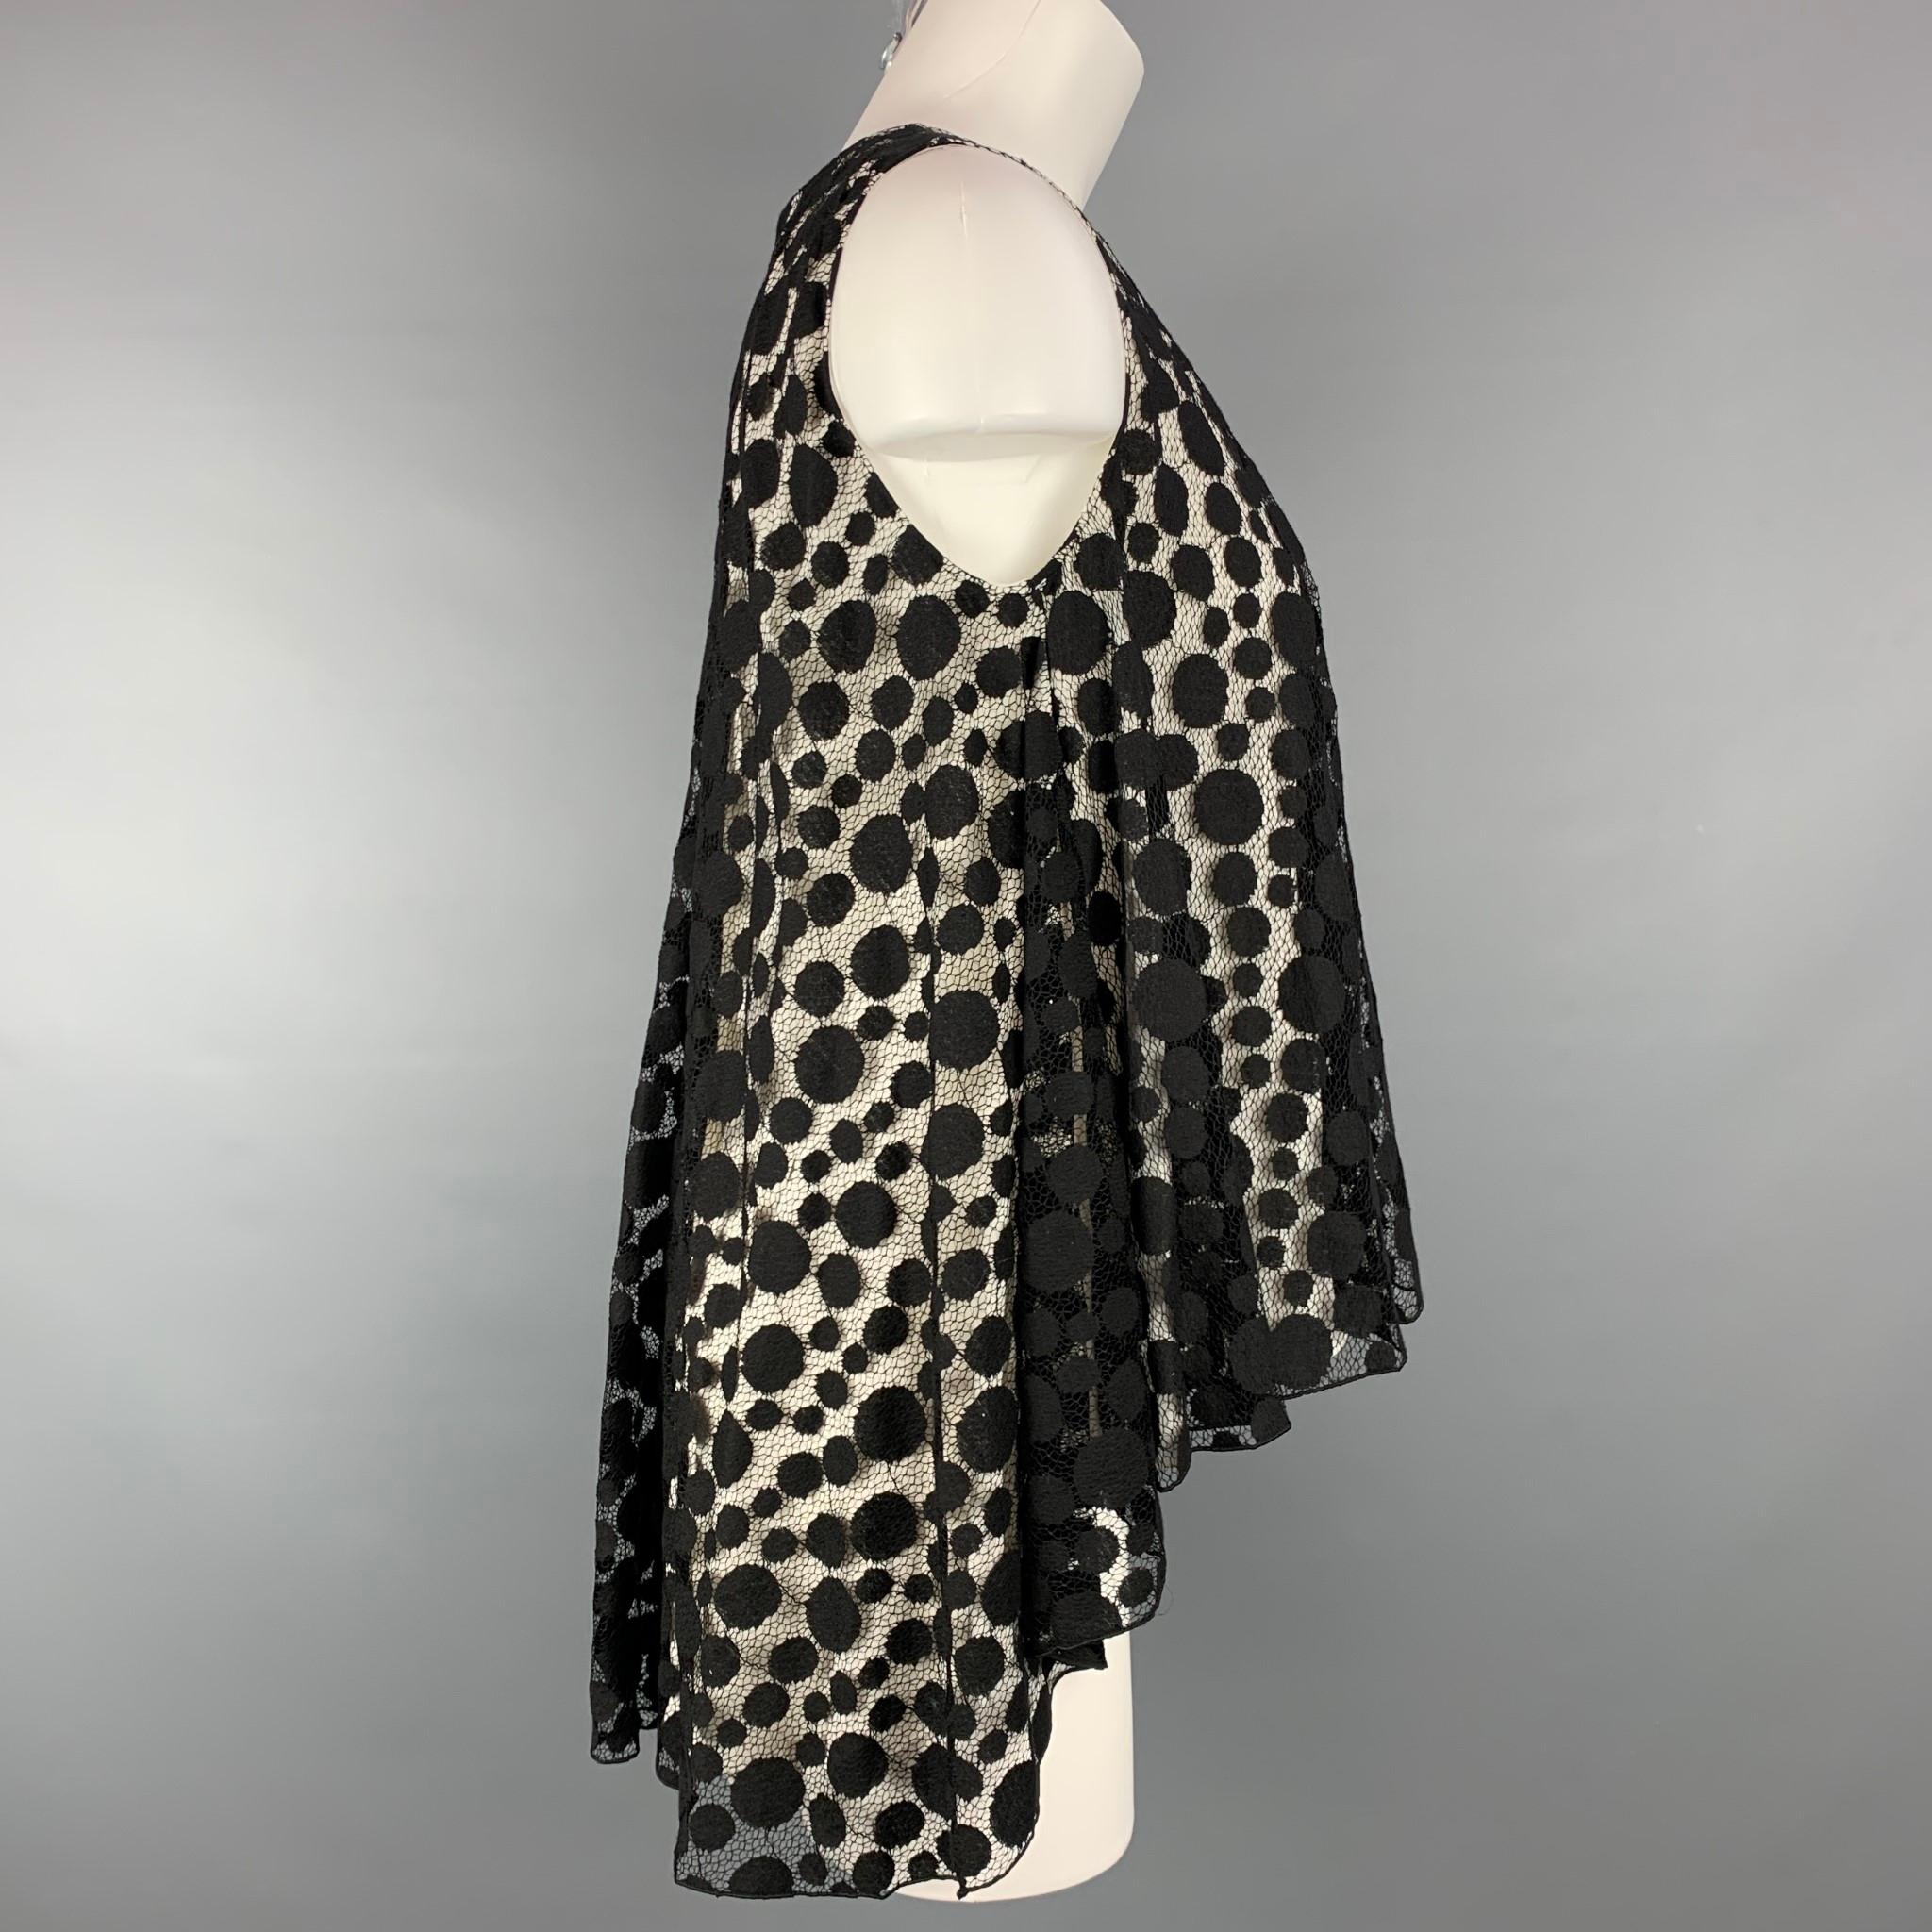 GIAMBATTISTA VALLI dress top comes in a black lace cotton / nylon with a white silk layer featuring a back zip closure. Made in Italy.

Very Good Pre-Owned Condition.
Marked: 40/XS

Measurements:

Bust: 36 in.   
Length: 28 in. 